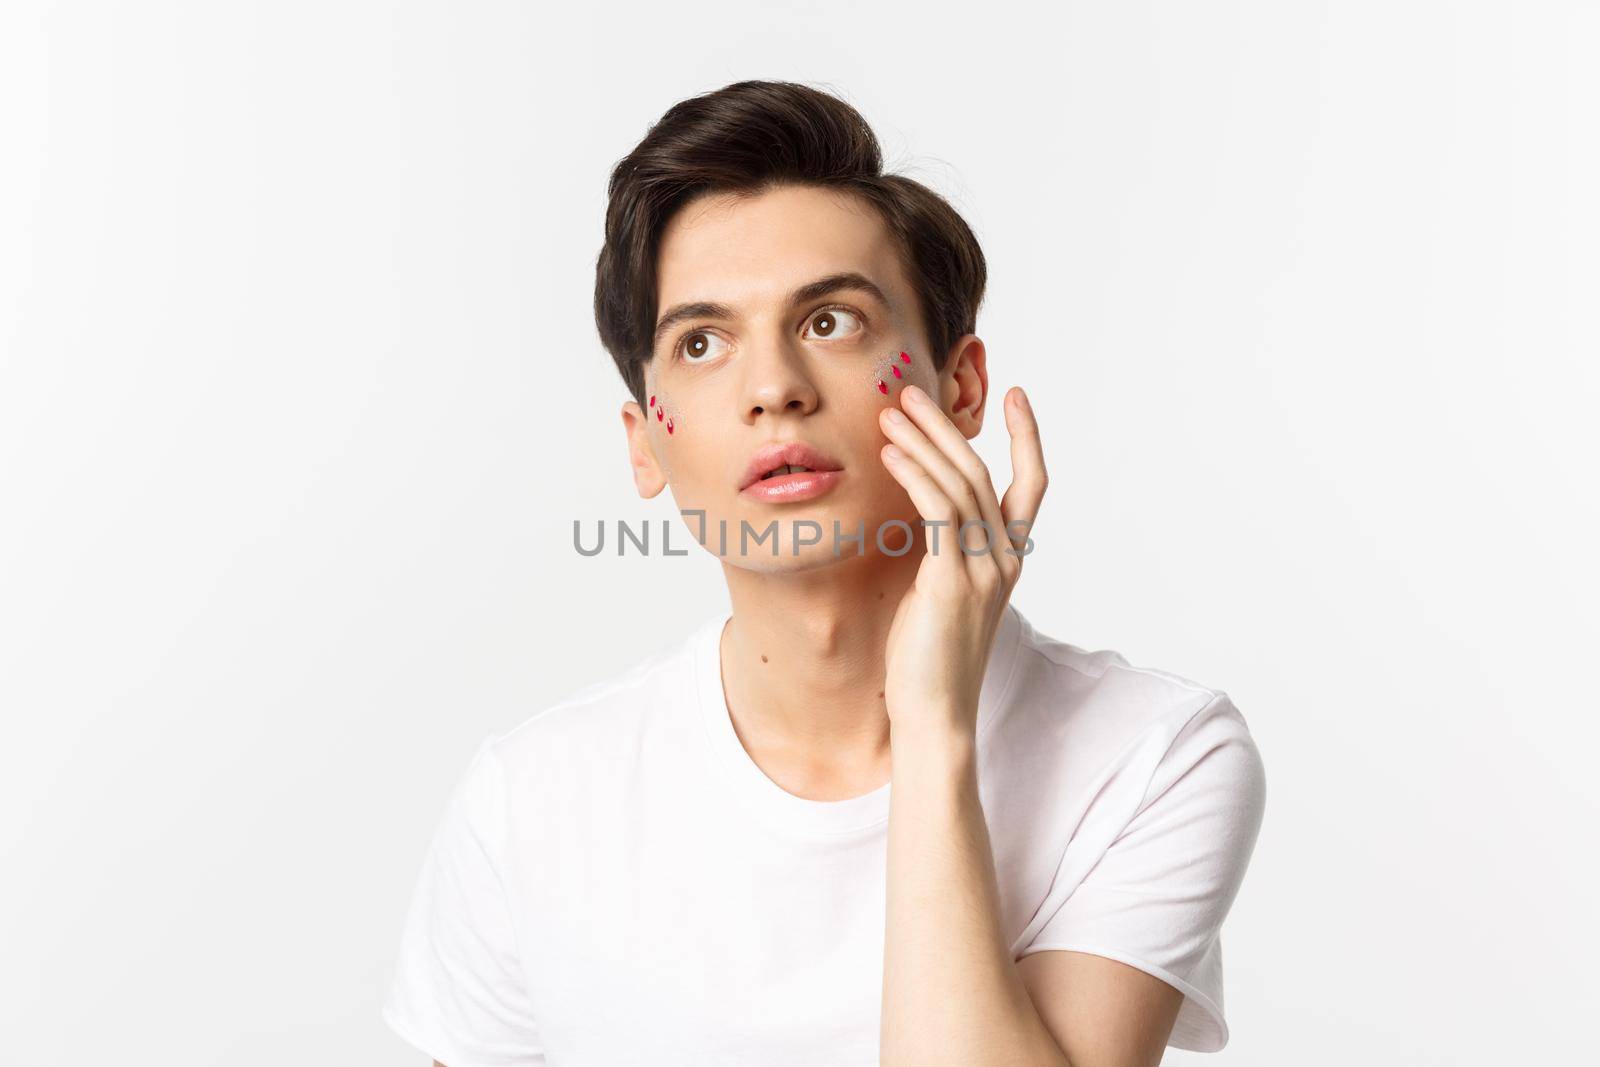 People, lgbtq community and lifestyle concept. Beautiful young gay man applying glitter under eyes for pride party, standing over white background.